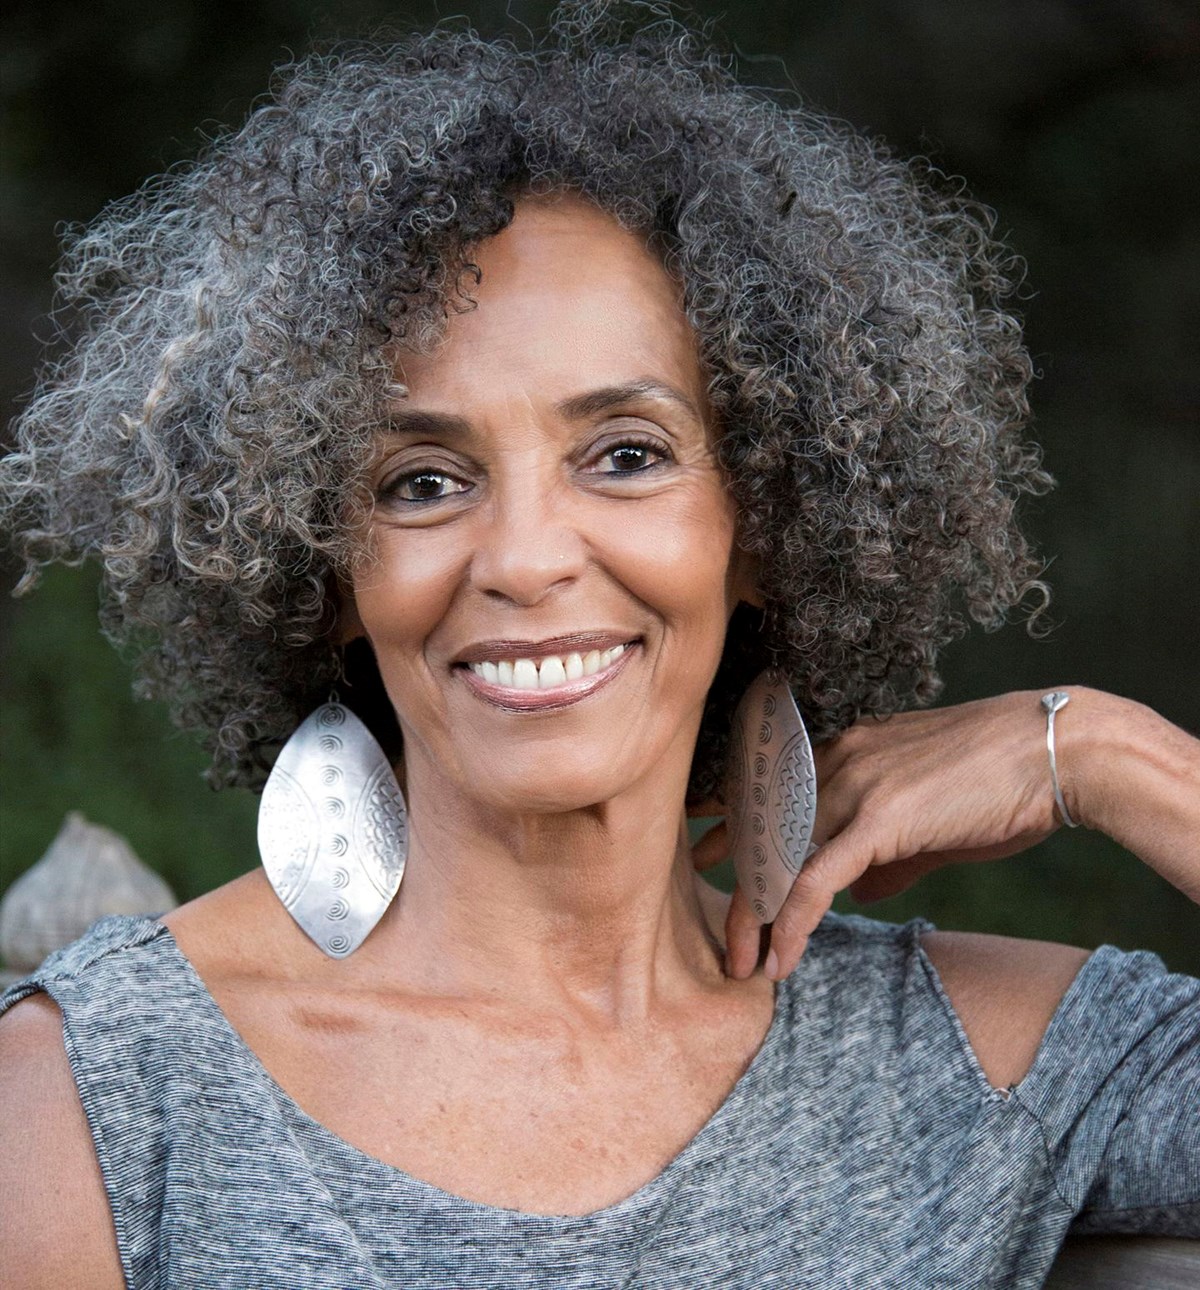 Fania E. Davis is a leading national voice on restorative justice. She is a long-time social justice activist, civil rights trial attorney, restorative justice practitioner, writer, professor and scholar with a PhD in Indigenous Knowledge.